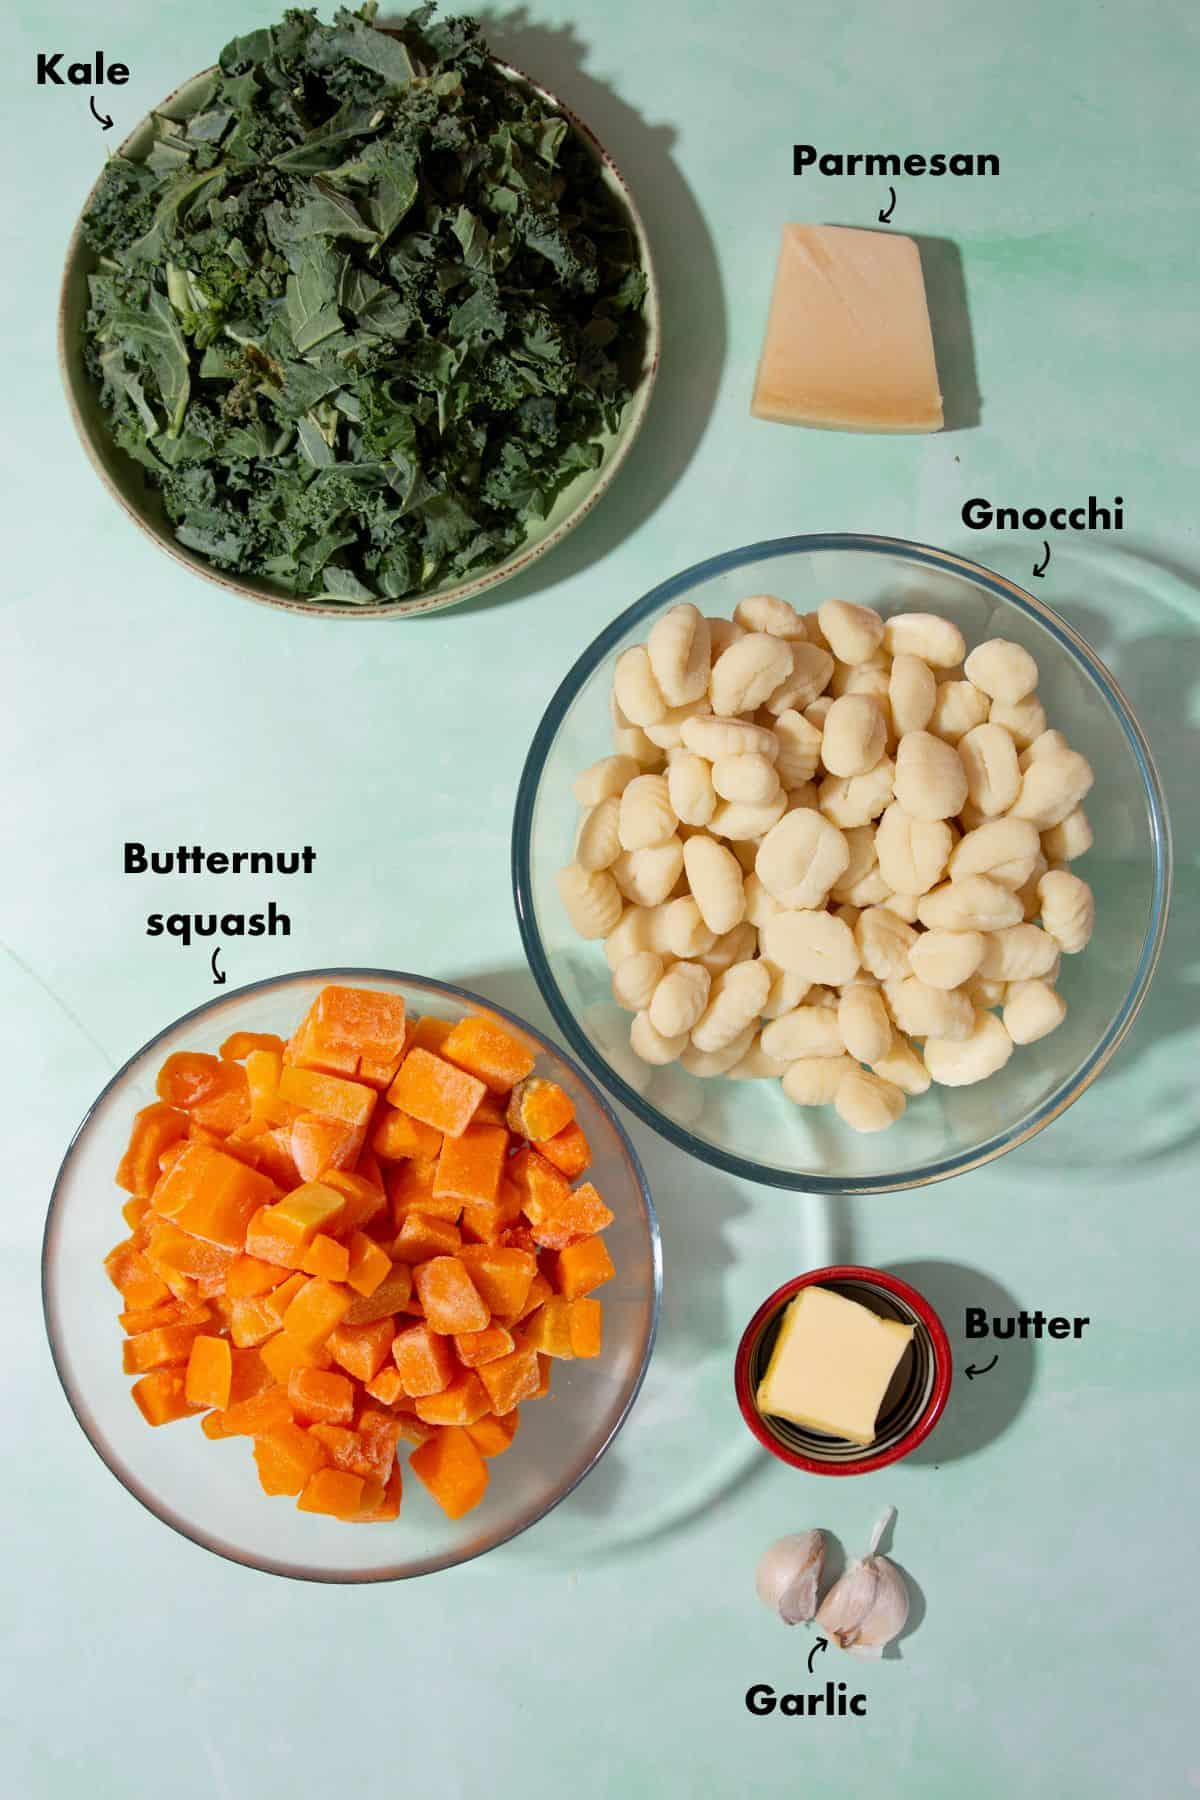 INgredients to make a gnocchi dish laid out on a plae blue back ground and labelled